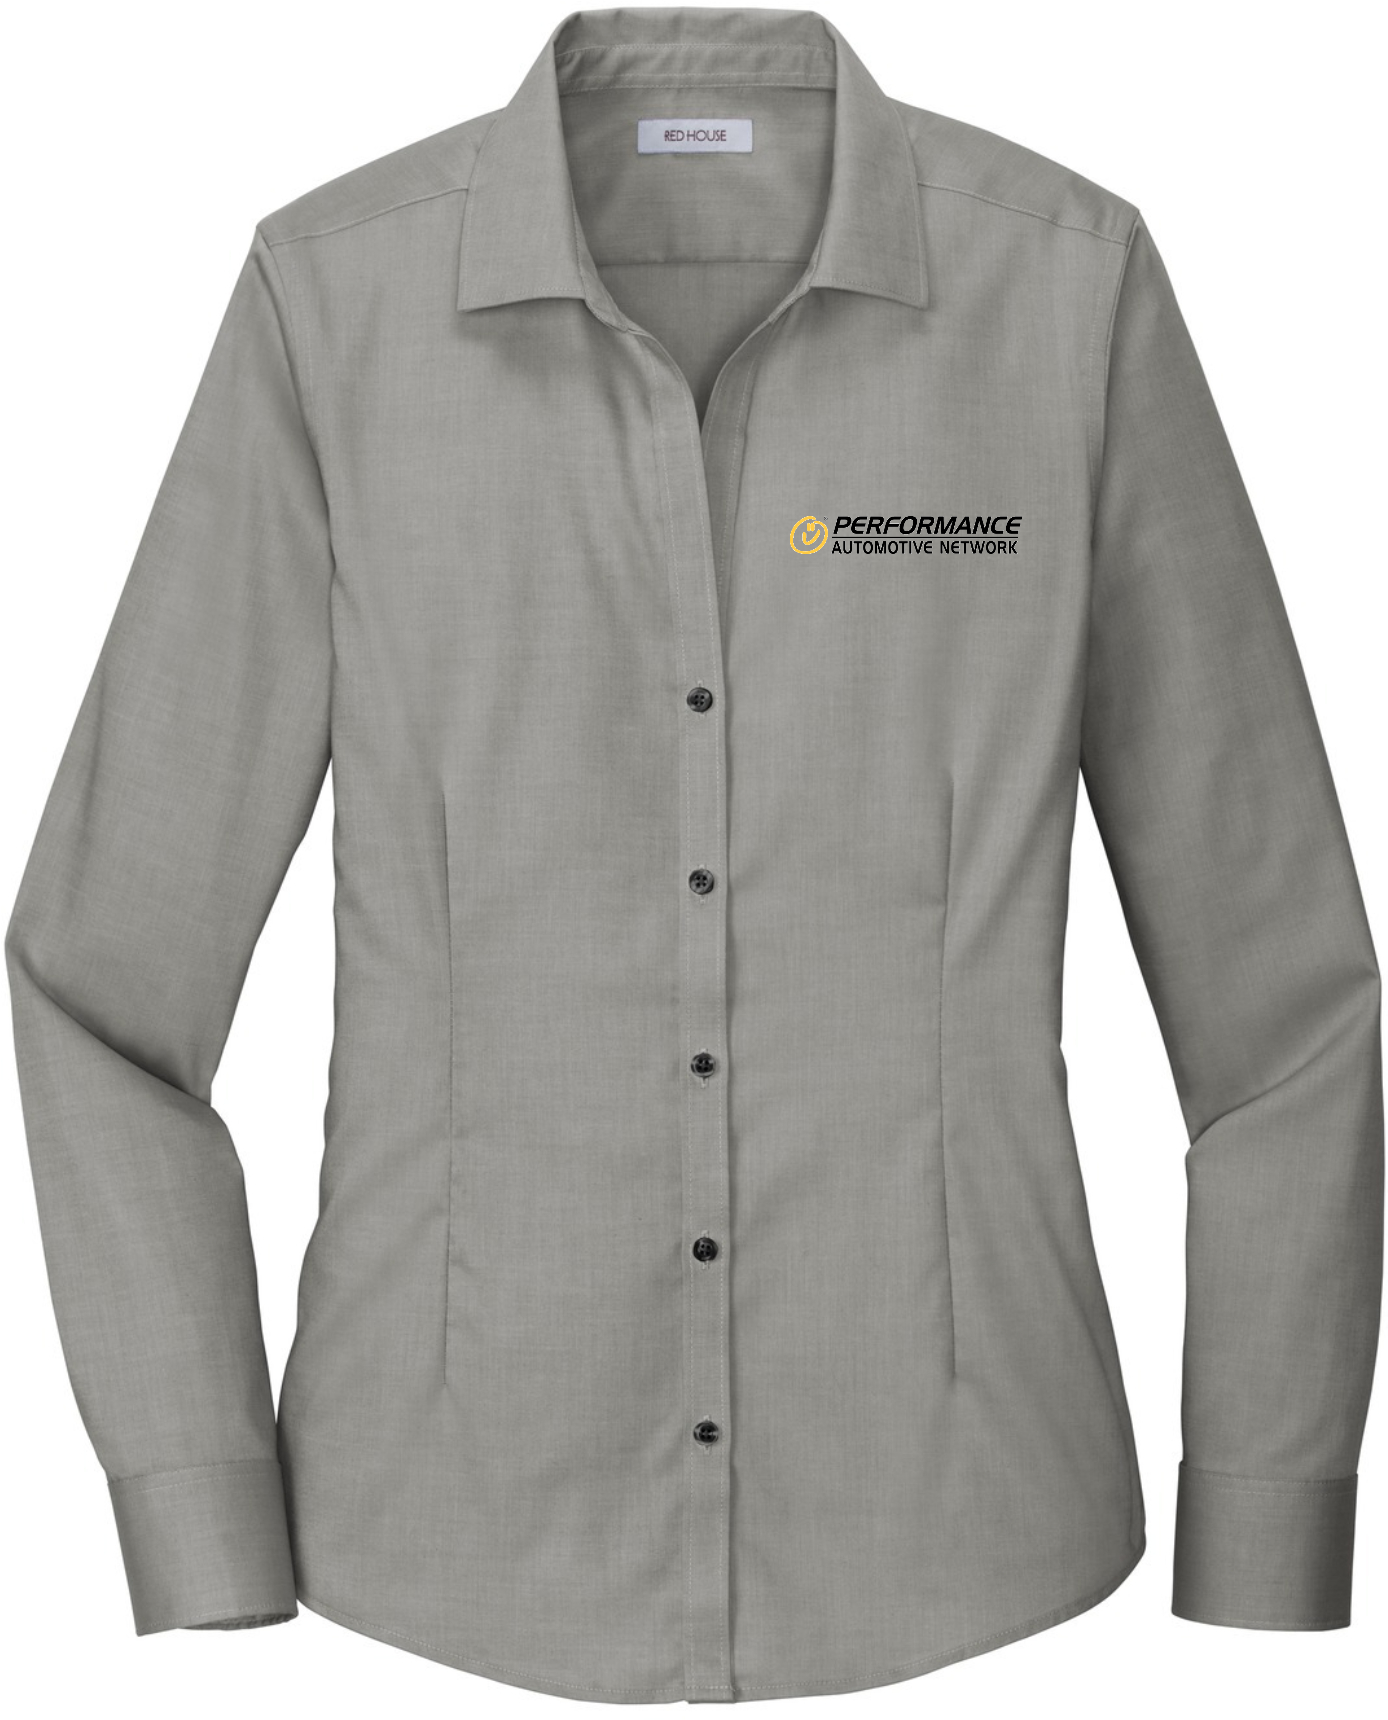 Performance Automotive Network - RH250 Red House® Ladies Pinpoint Oxford Non-Iron Shirt